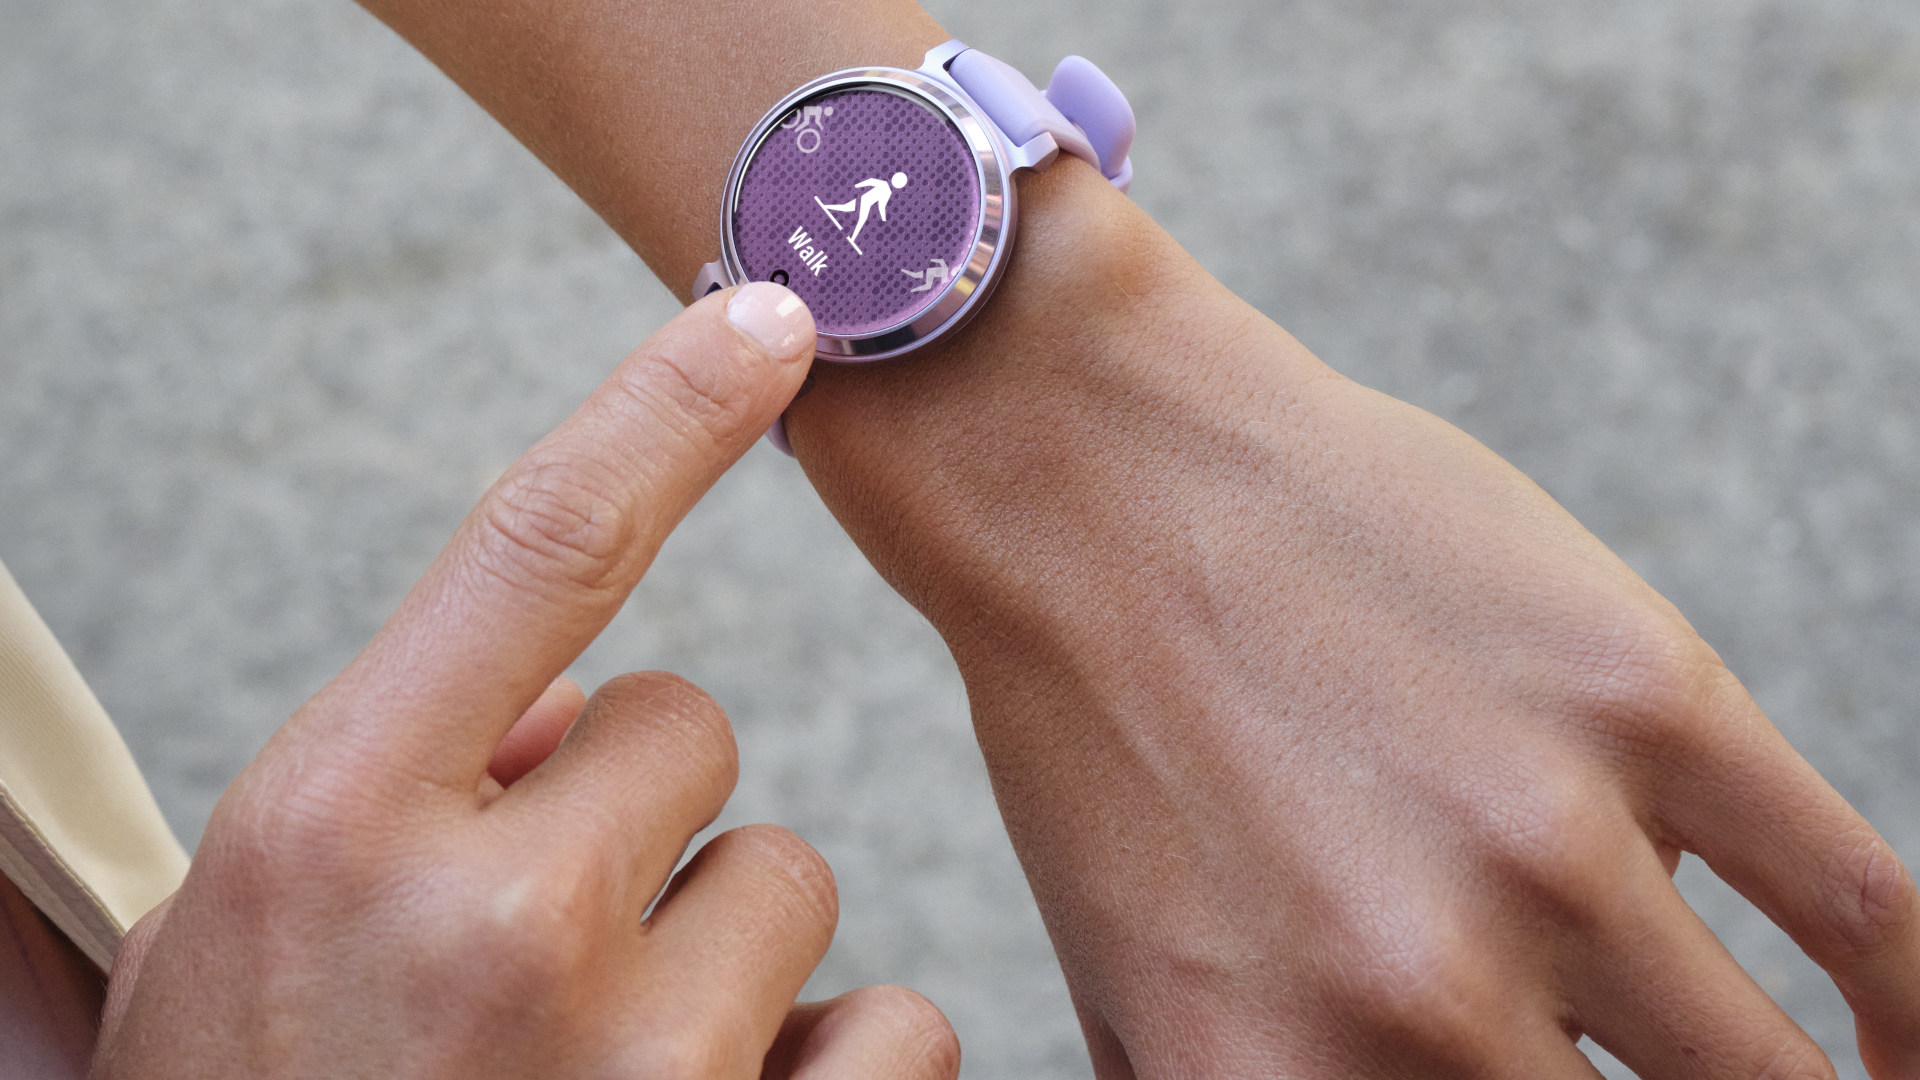 Garmin Lily 2 smartwatch launched: An improved watch for women